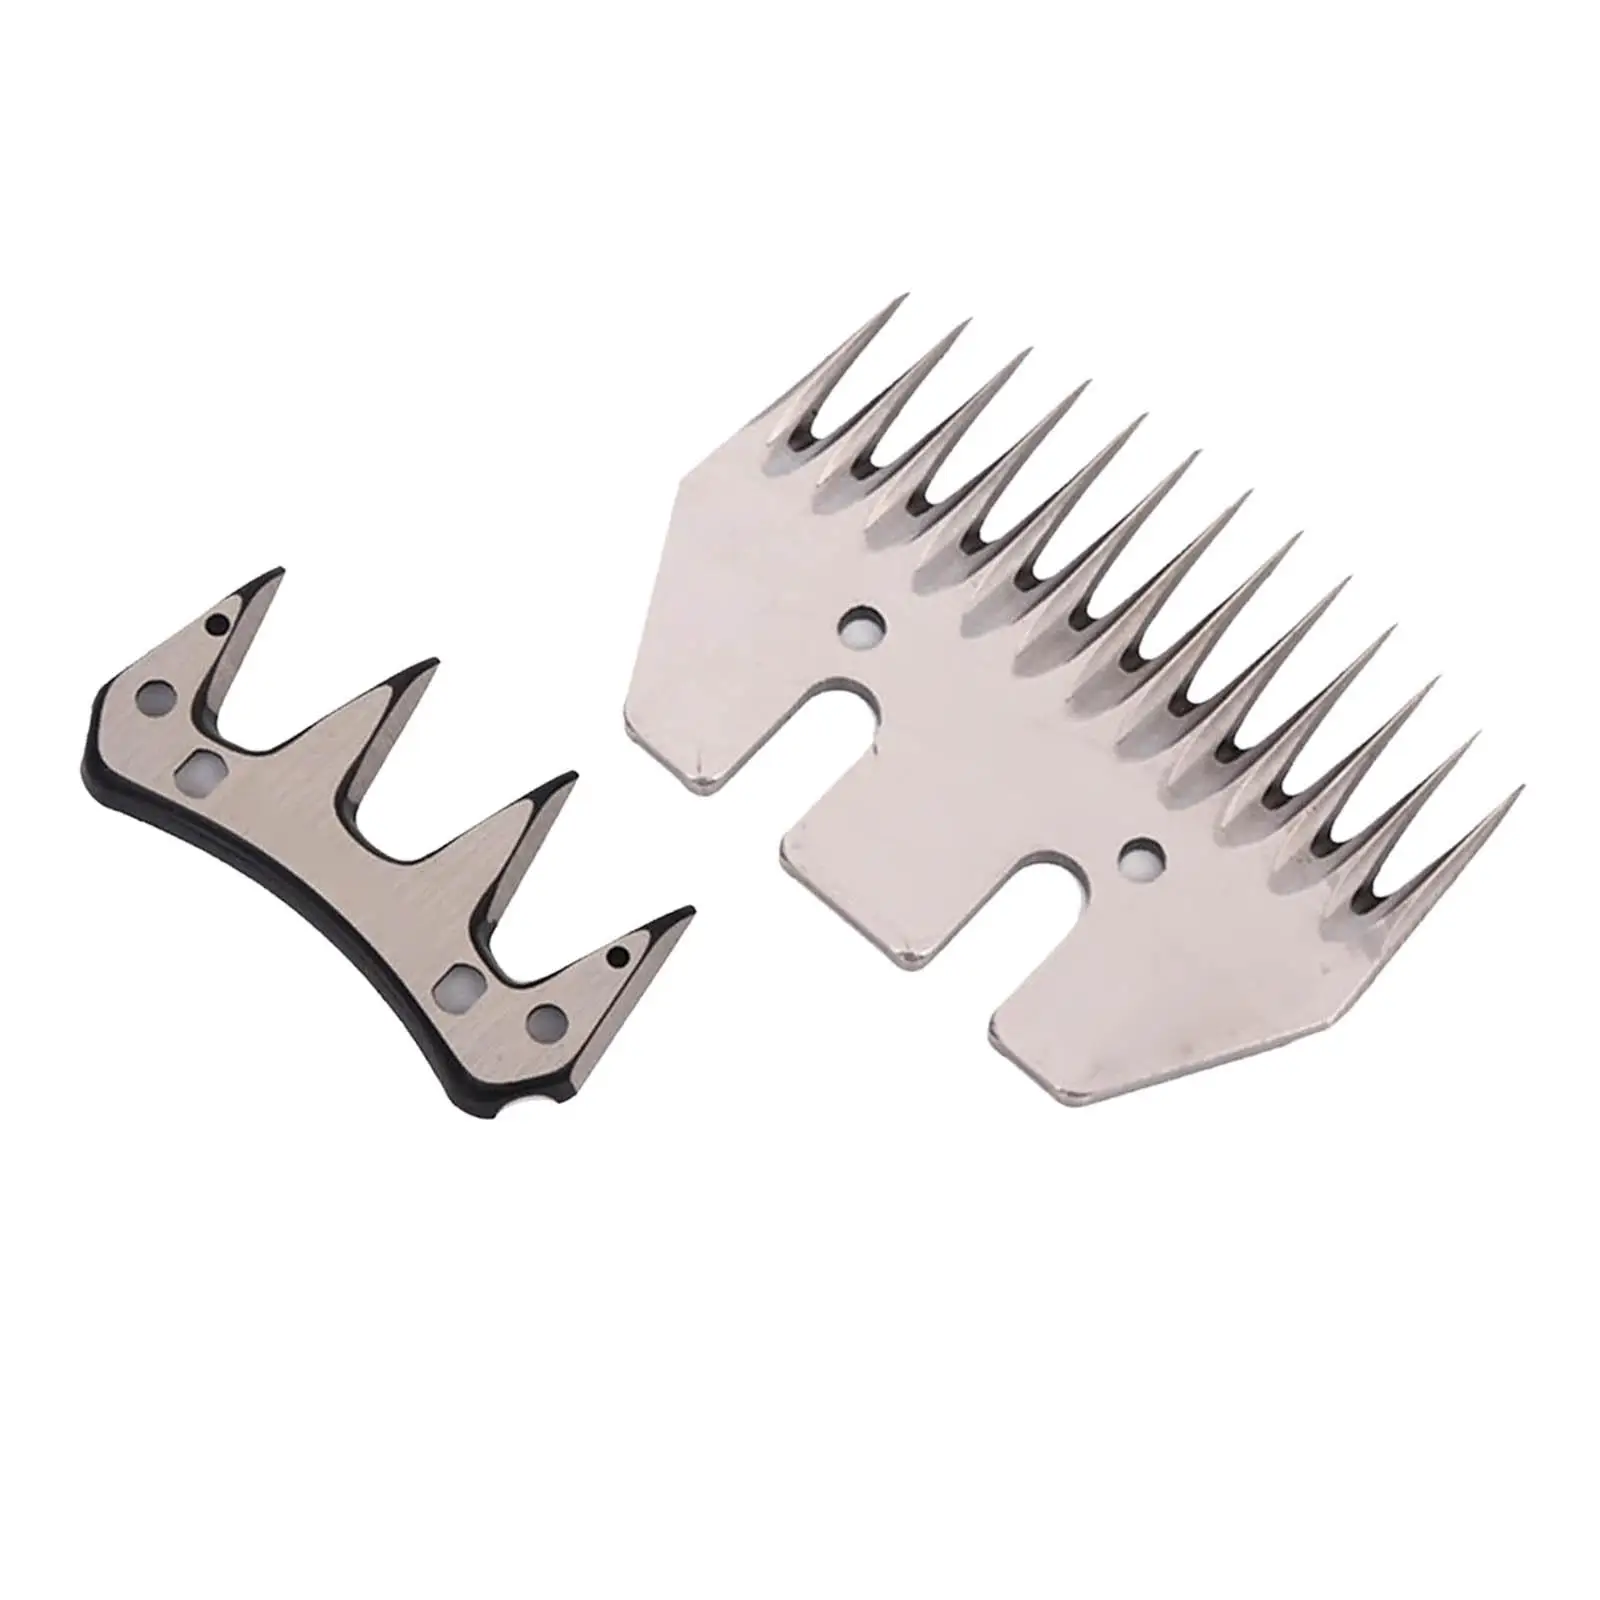 Sheep Shears Stainless Steel Steel for Farming Agriculture Equipment